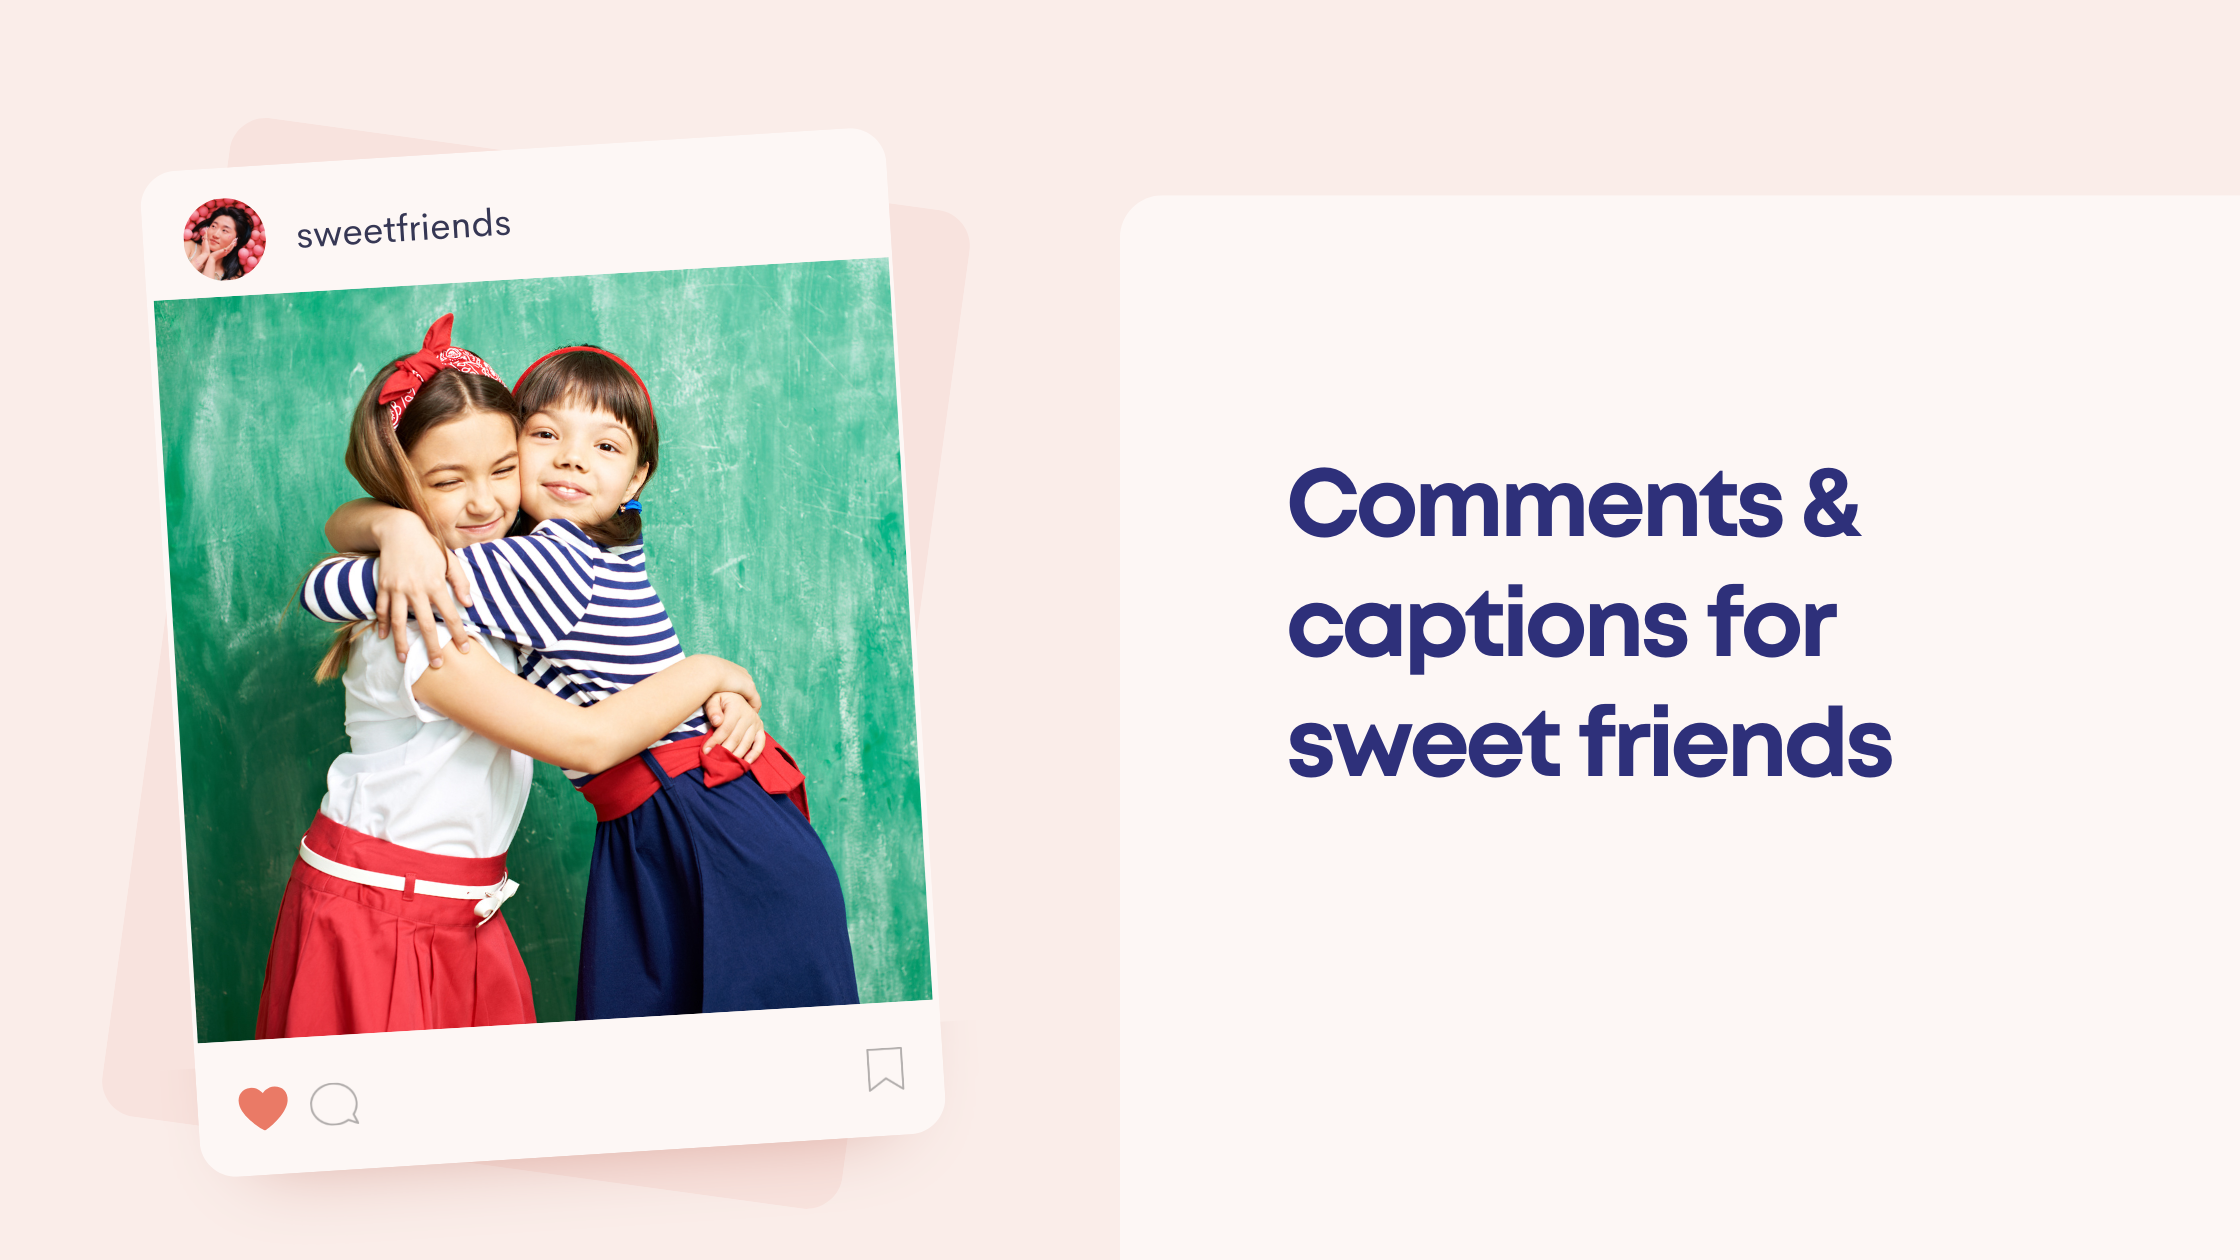 Remote.tools shares a list of sweet comments and captions for Instagram posts